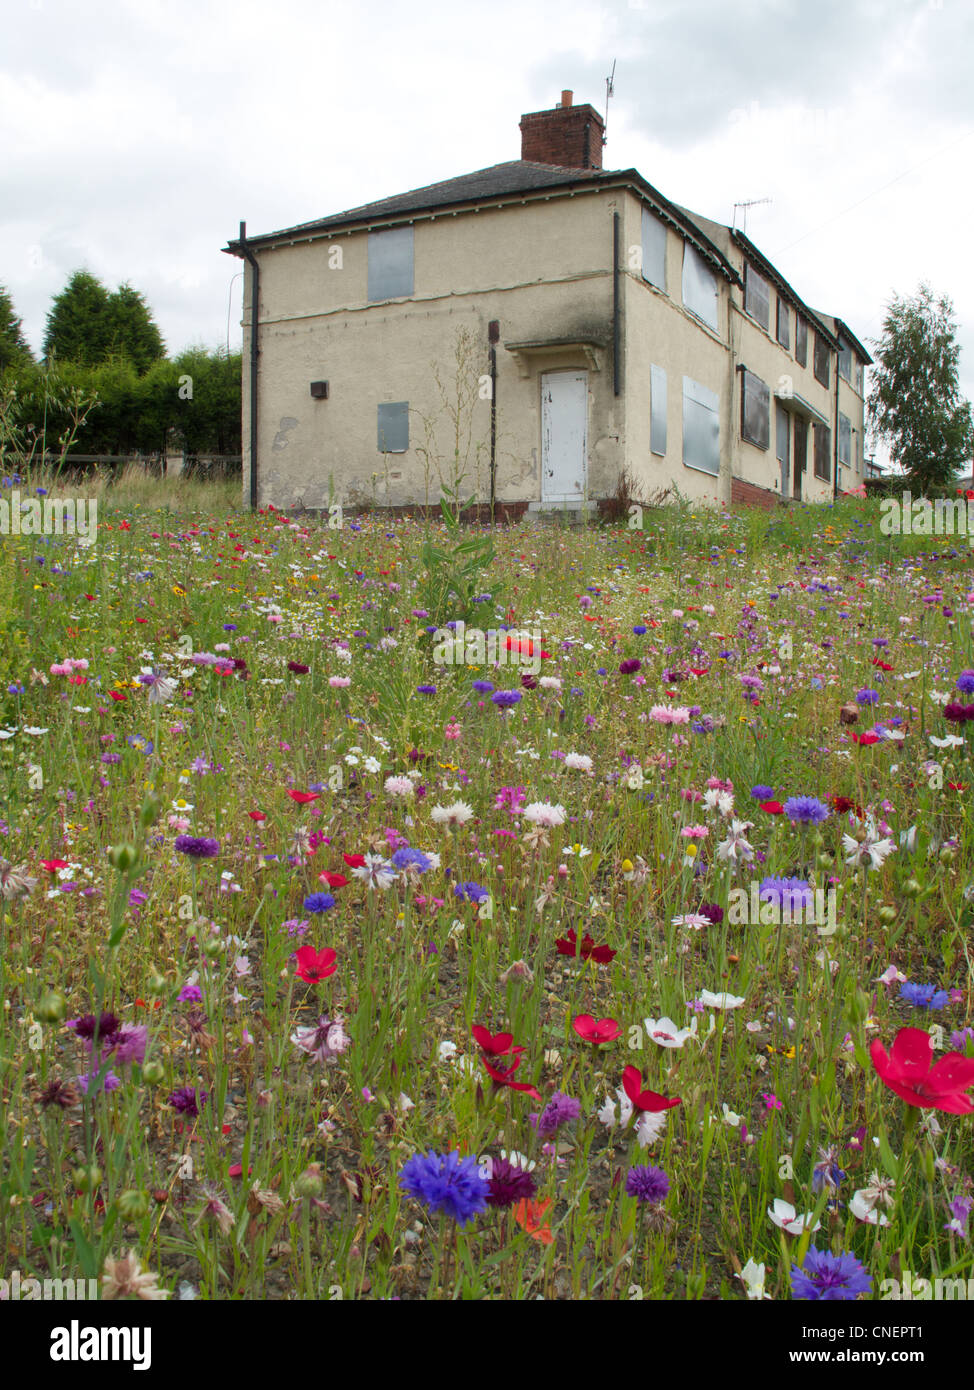 Derelict houses awaiting demolition surrounded by wild flowers Stock Photo